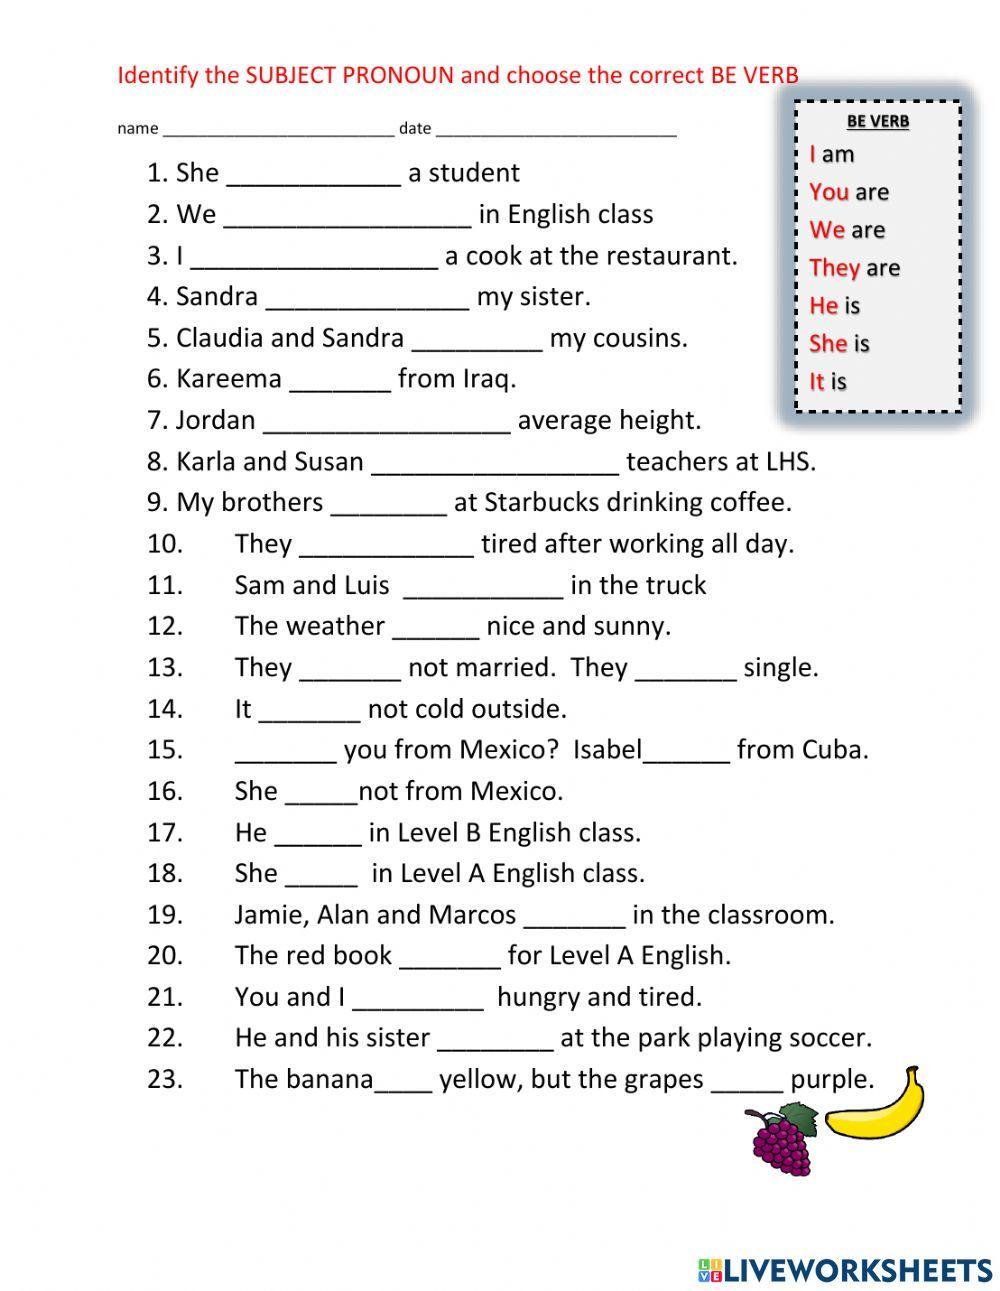 Subject Pronouns and BE Verb